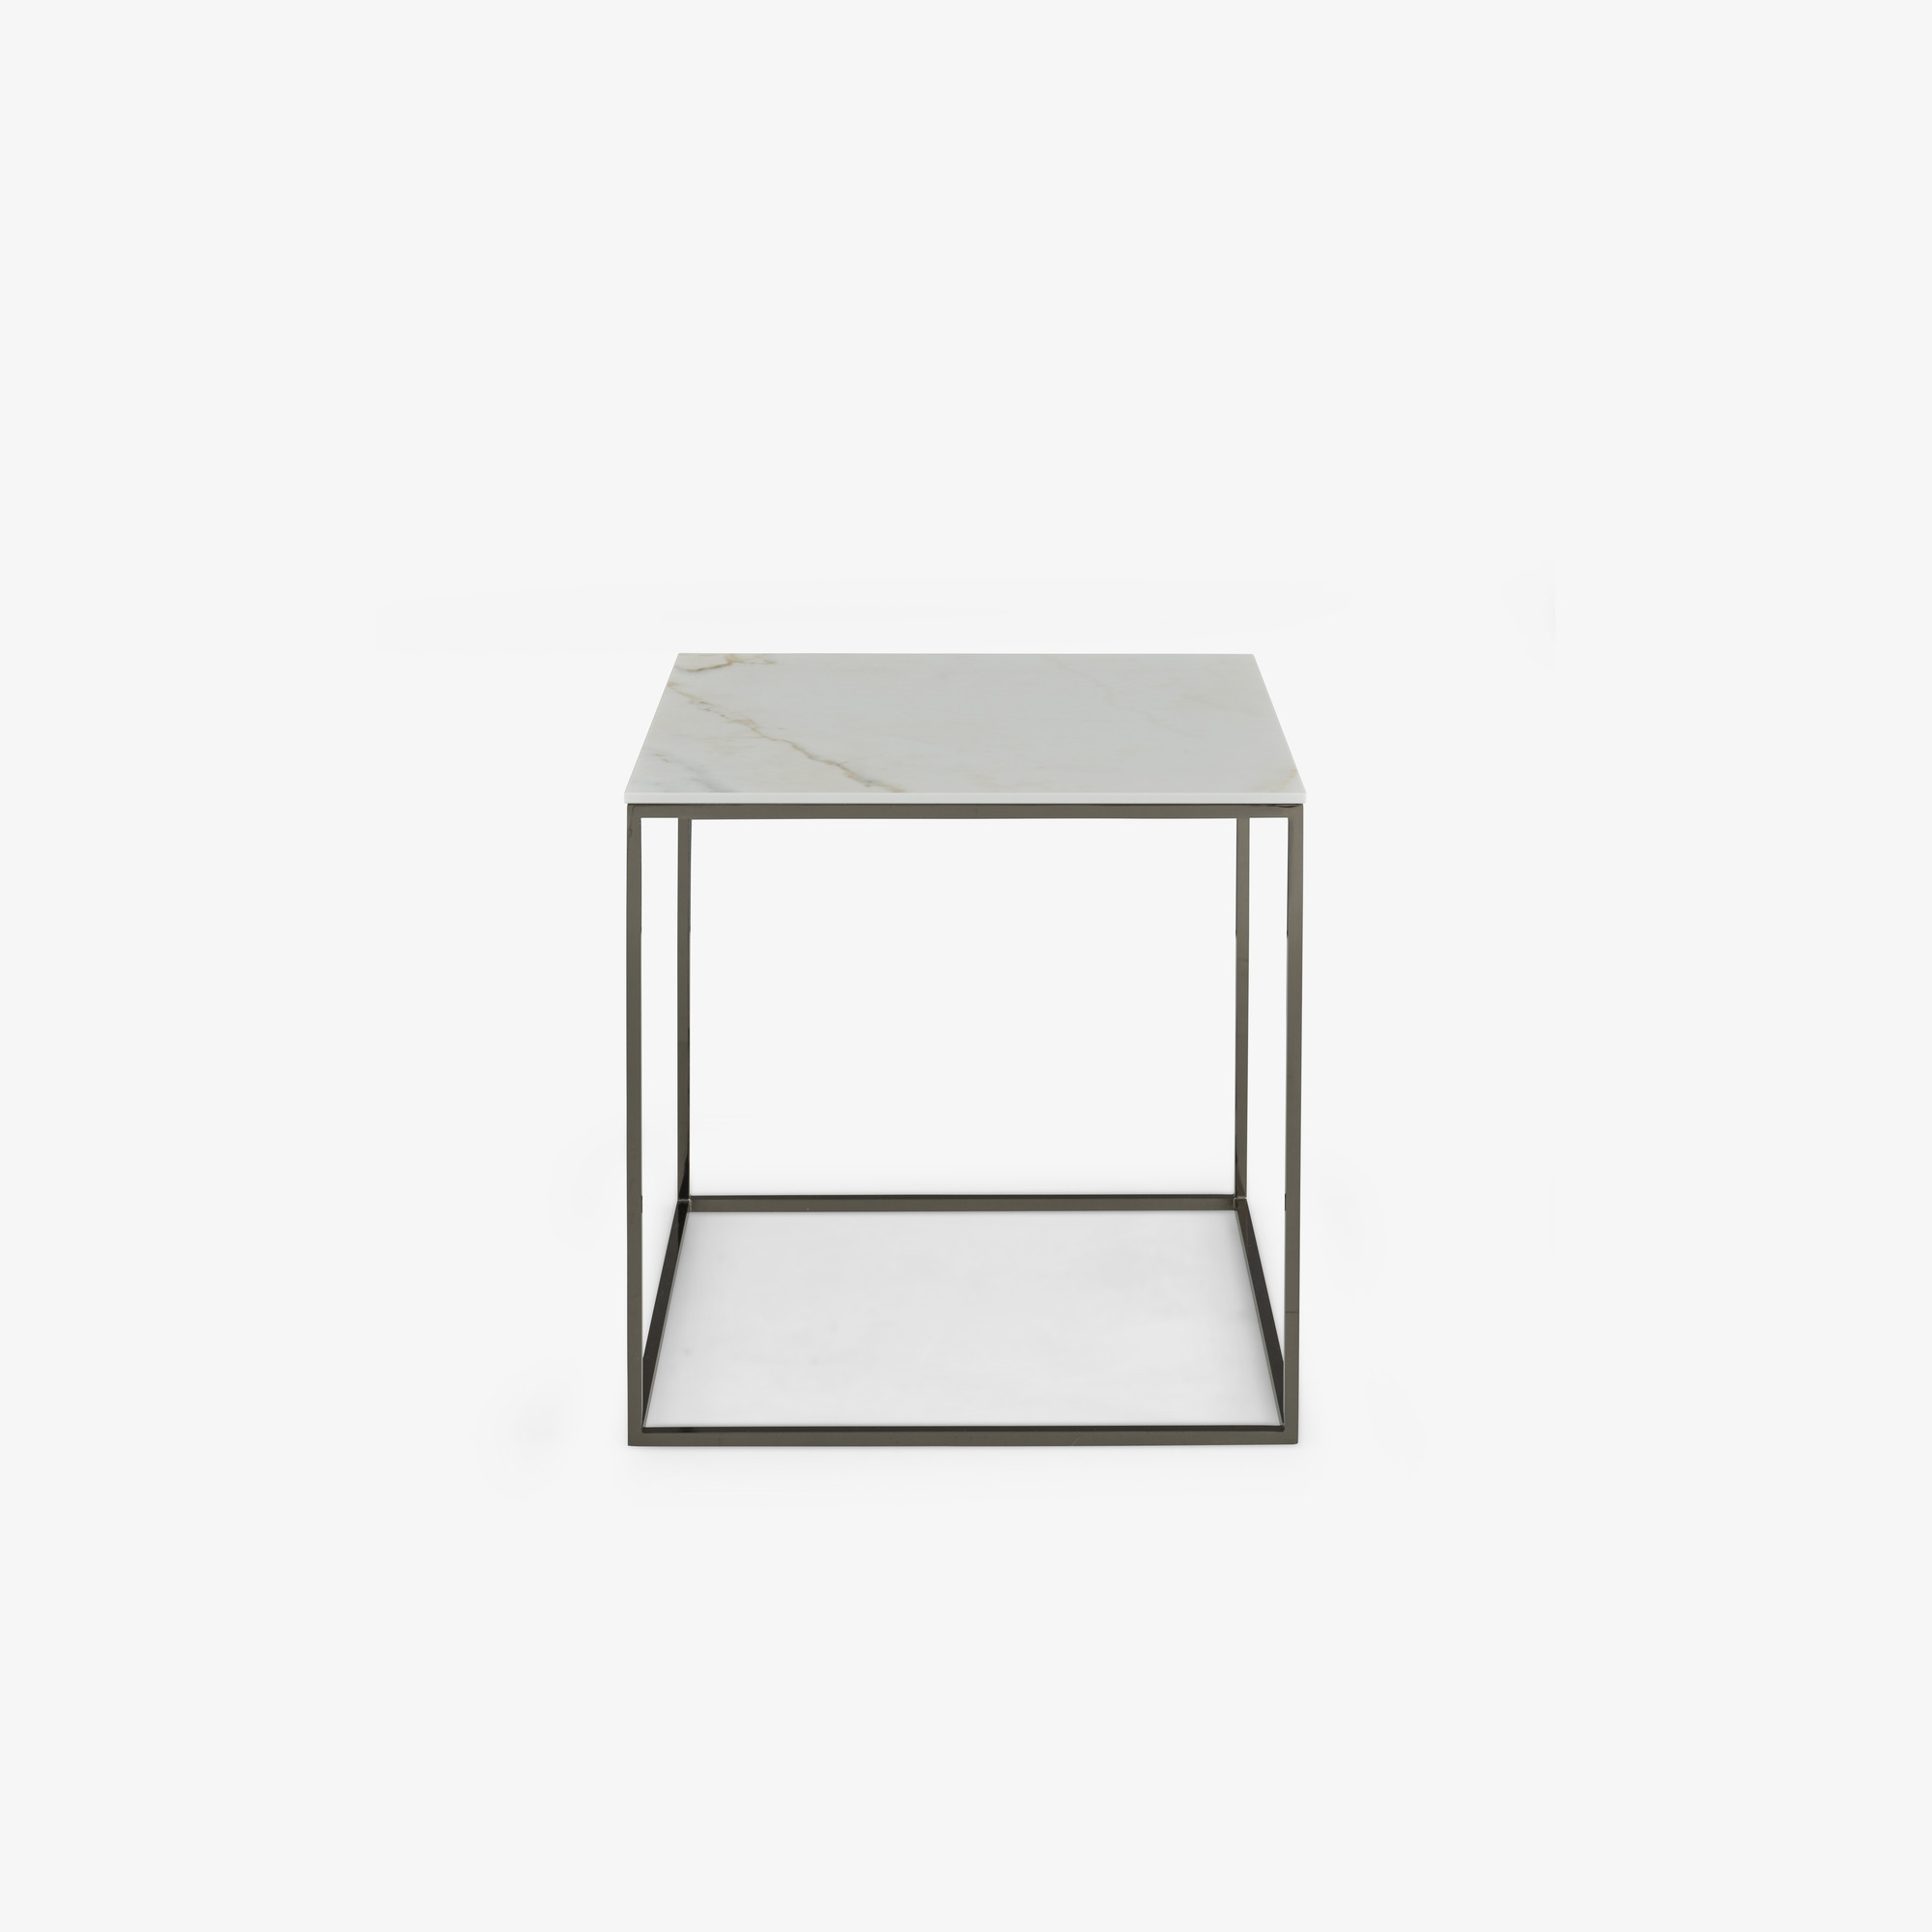 Image Low table - small - 1